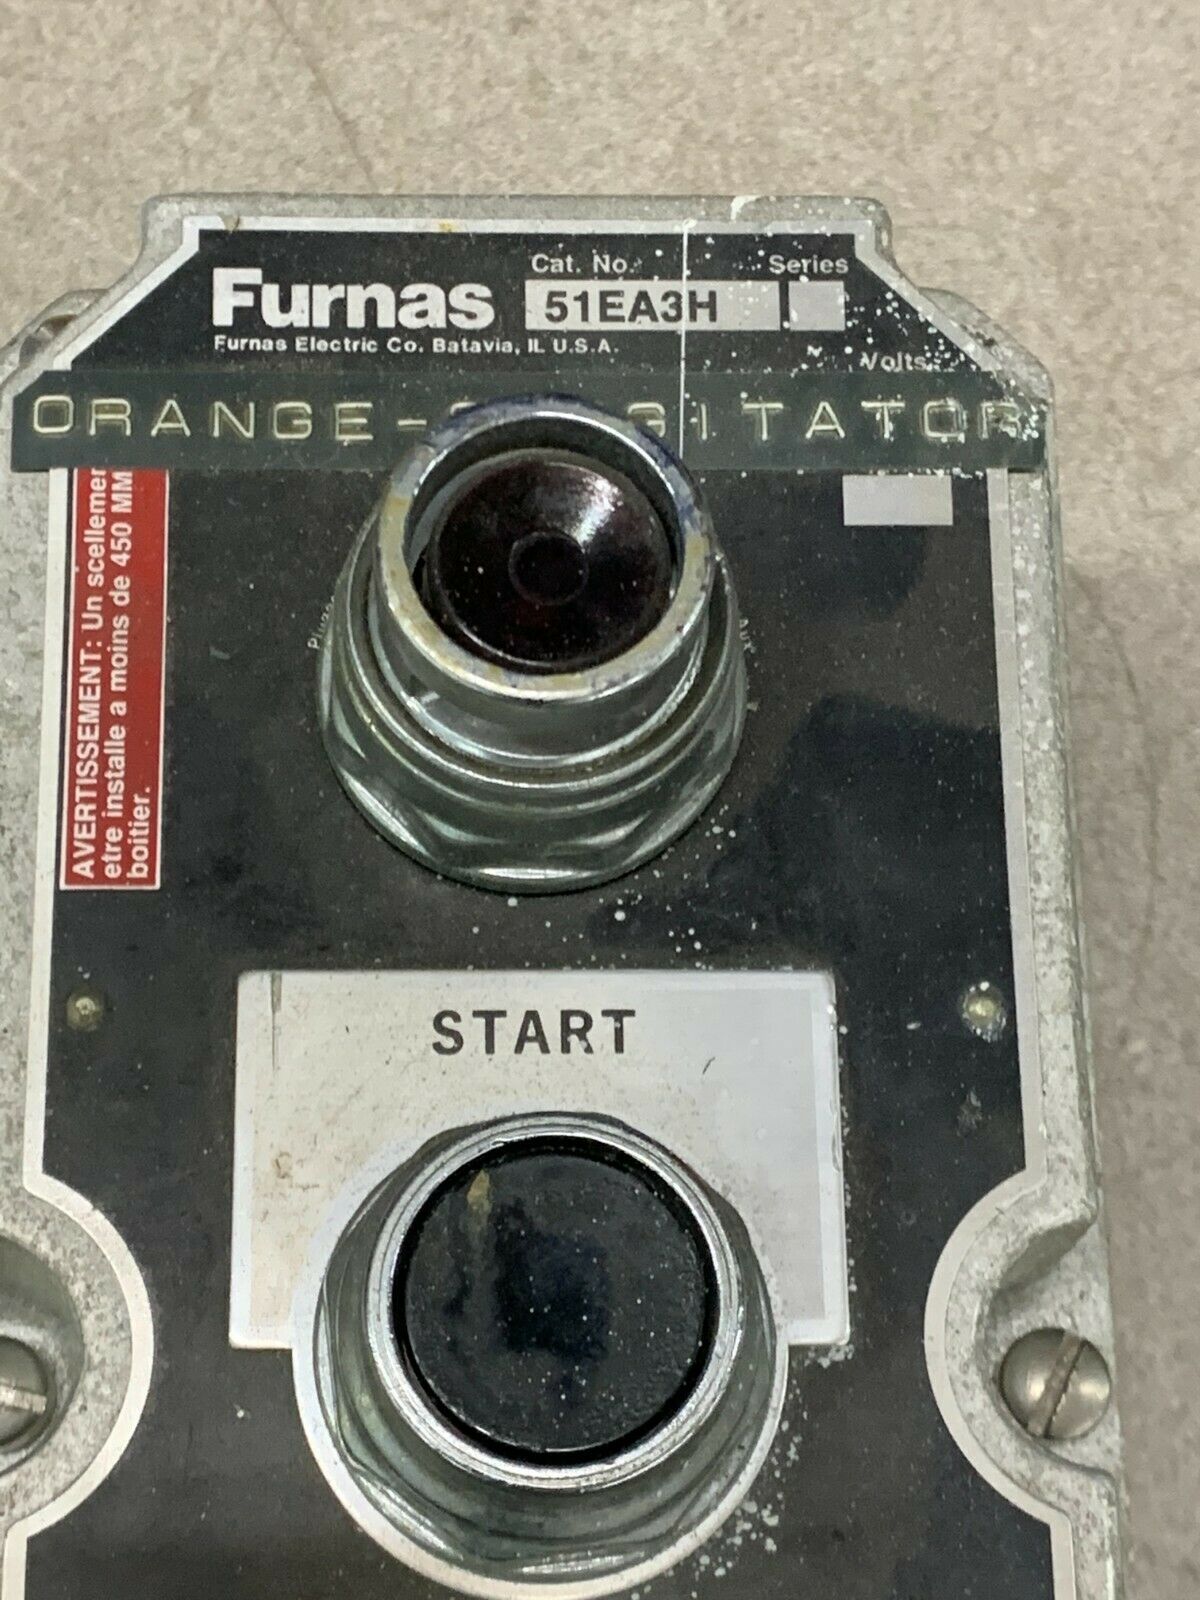 USED FURNAS 3-BUTTON PUSHBUTTON ENCLOSURE 51EA3H